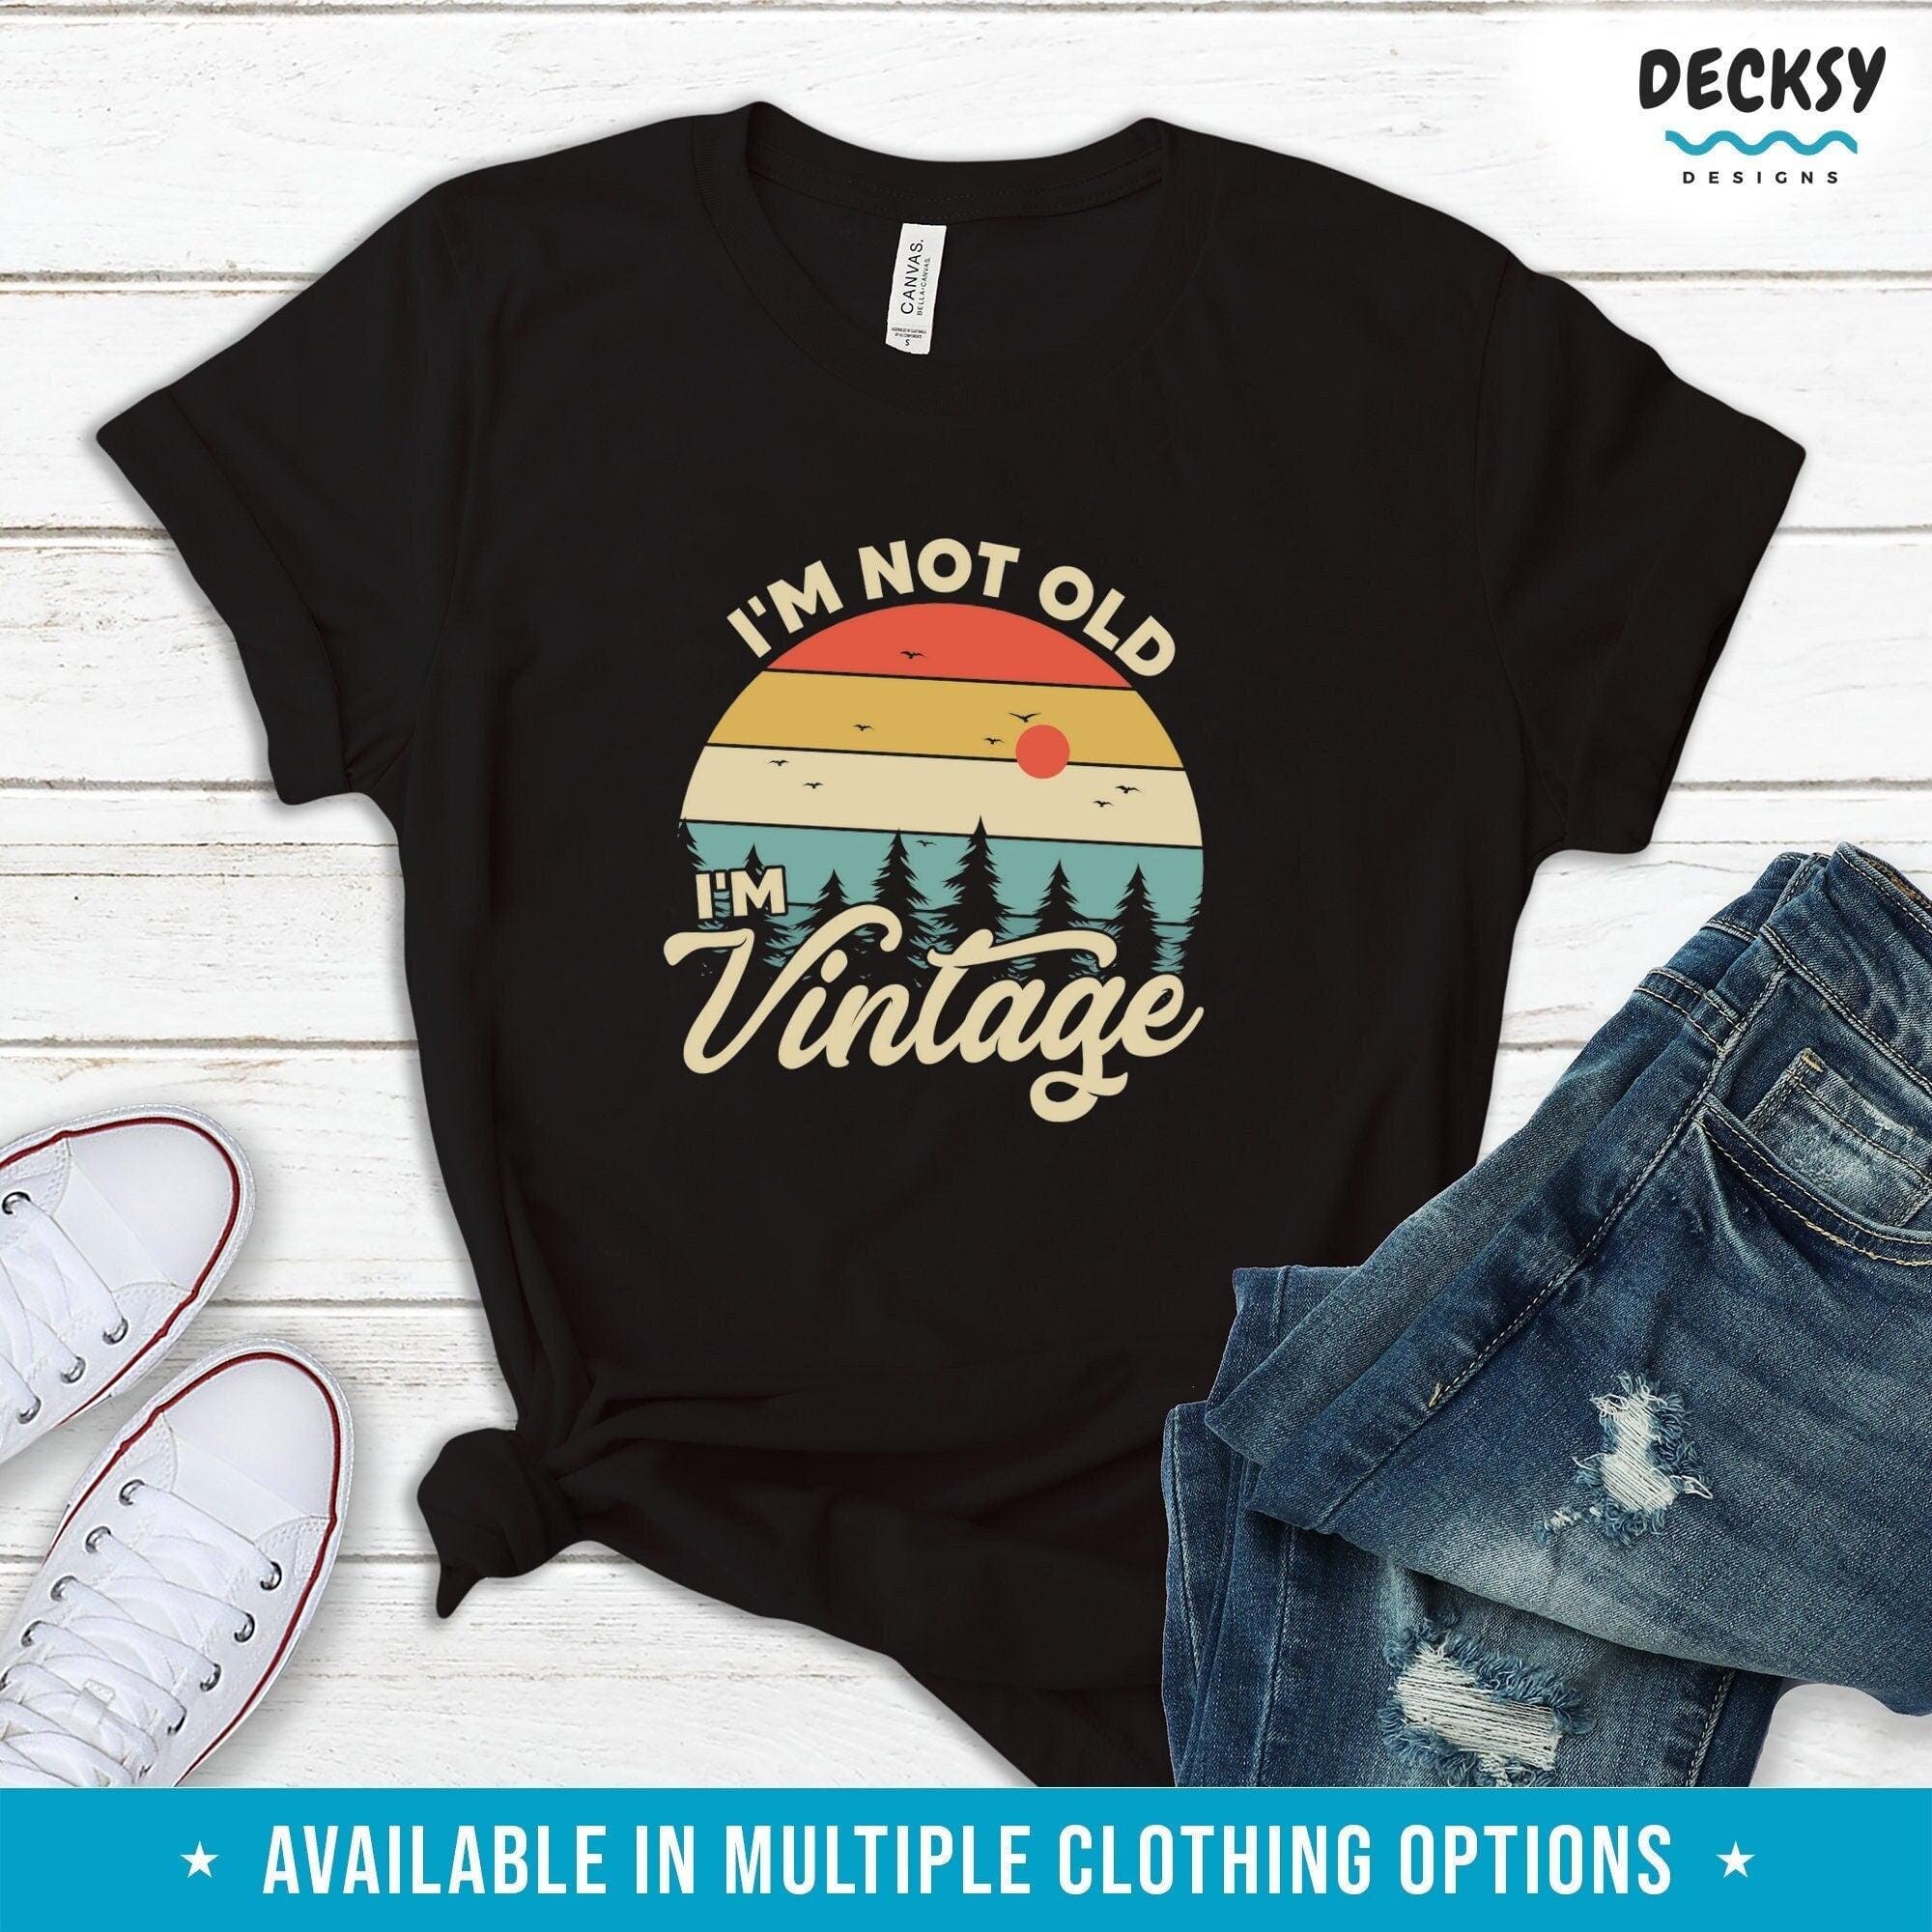 Retro Birthday Shirt Gift-Clothing:Gender-Neutral Adult Clothing:Tops & Tees:T-shirts:Graphic Tees-DecksyDesigns